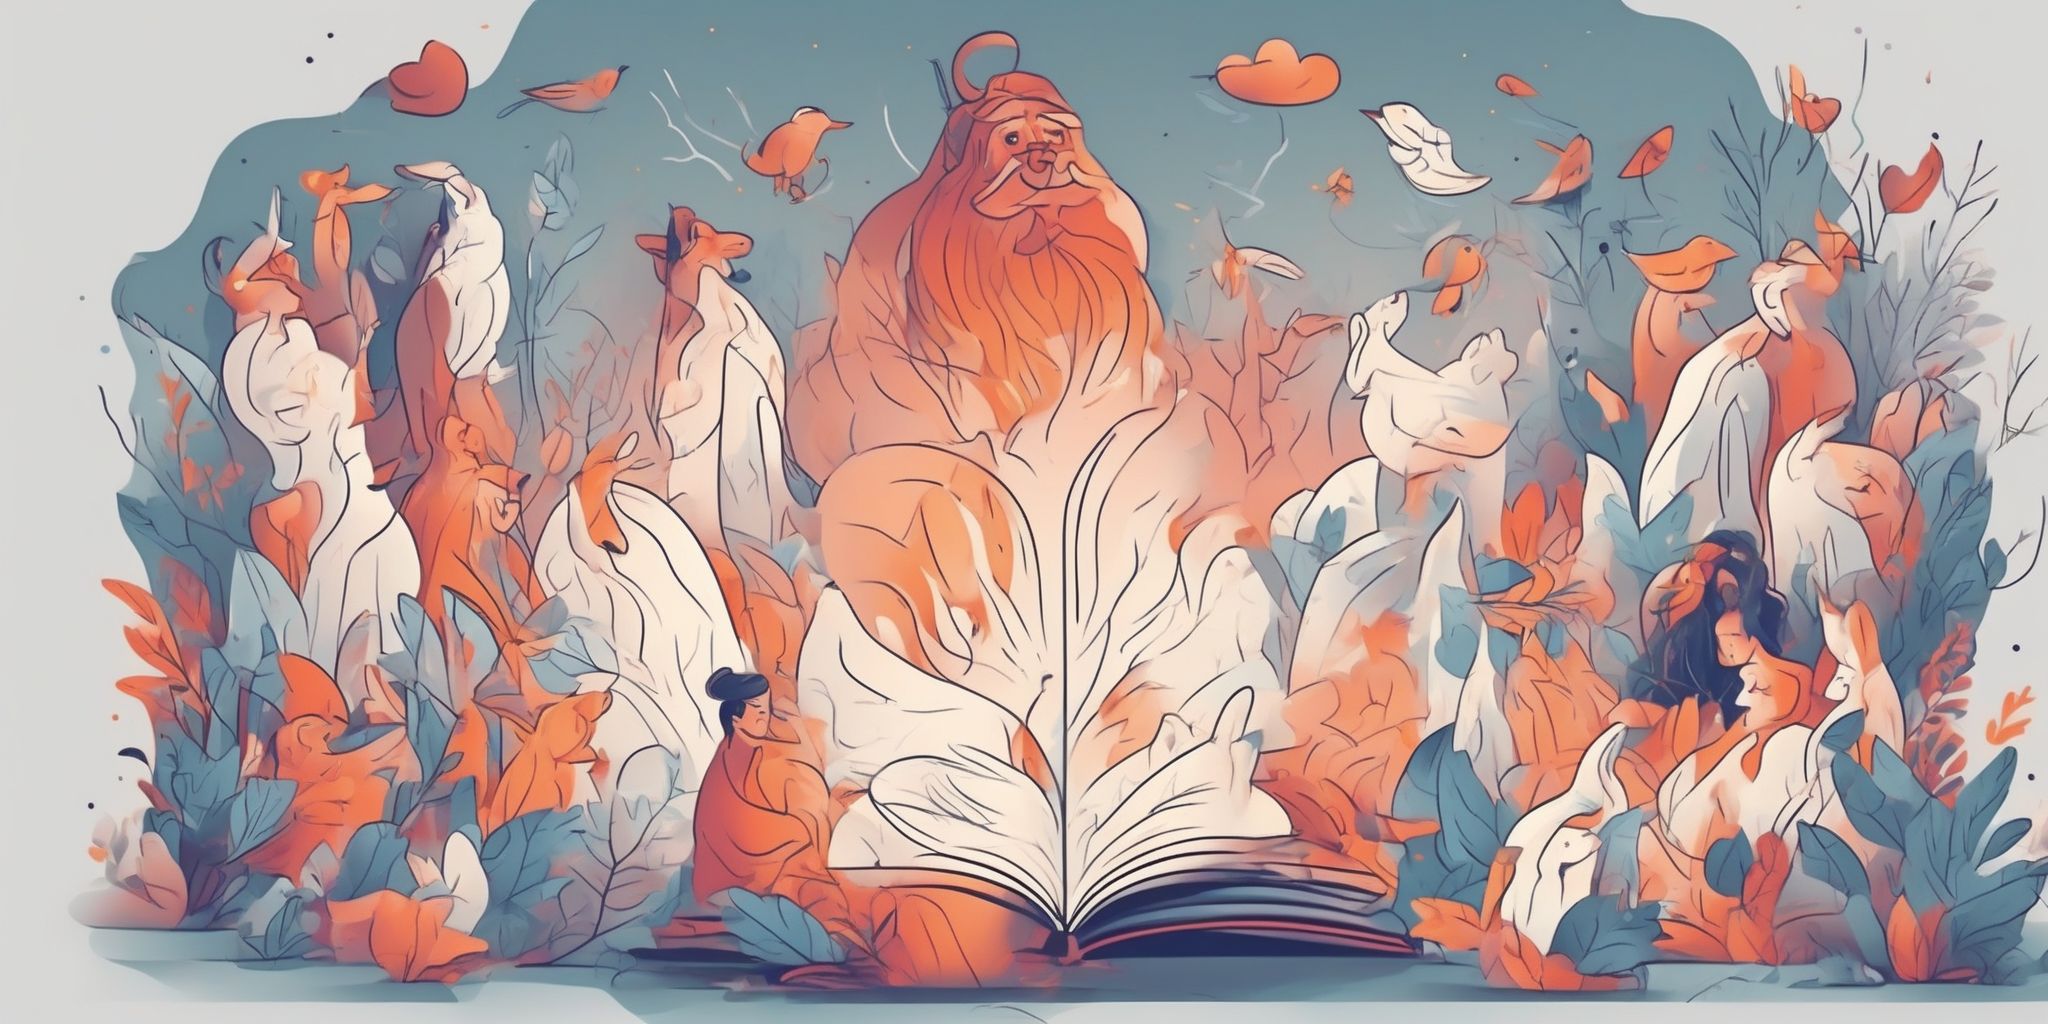 Storytelling in illustration style with gradients and white background